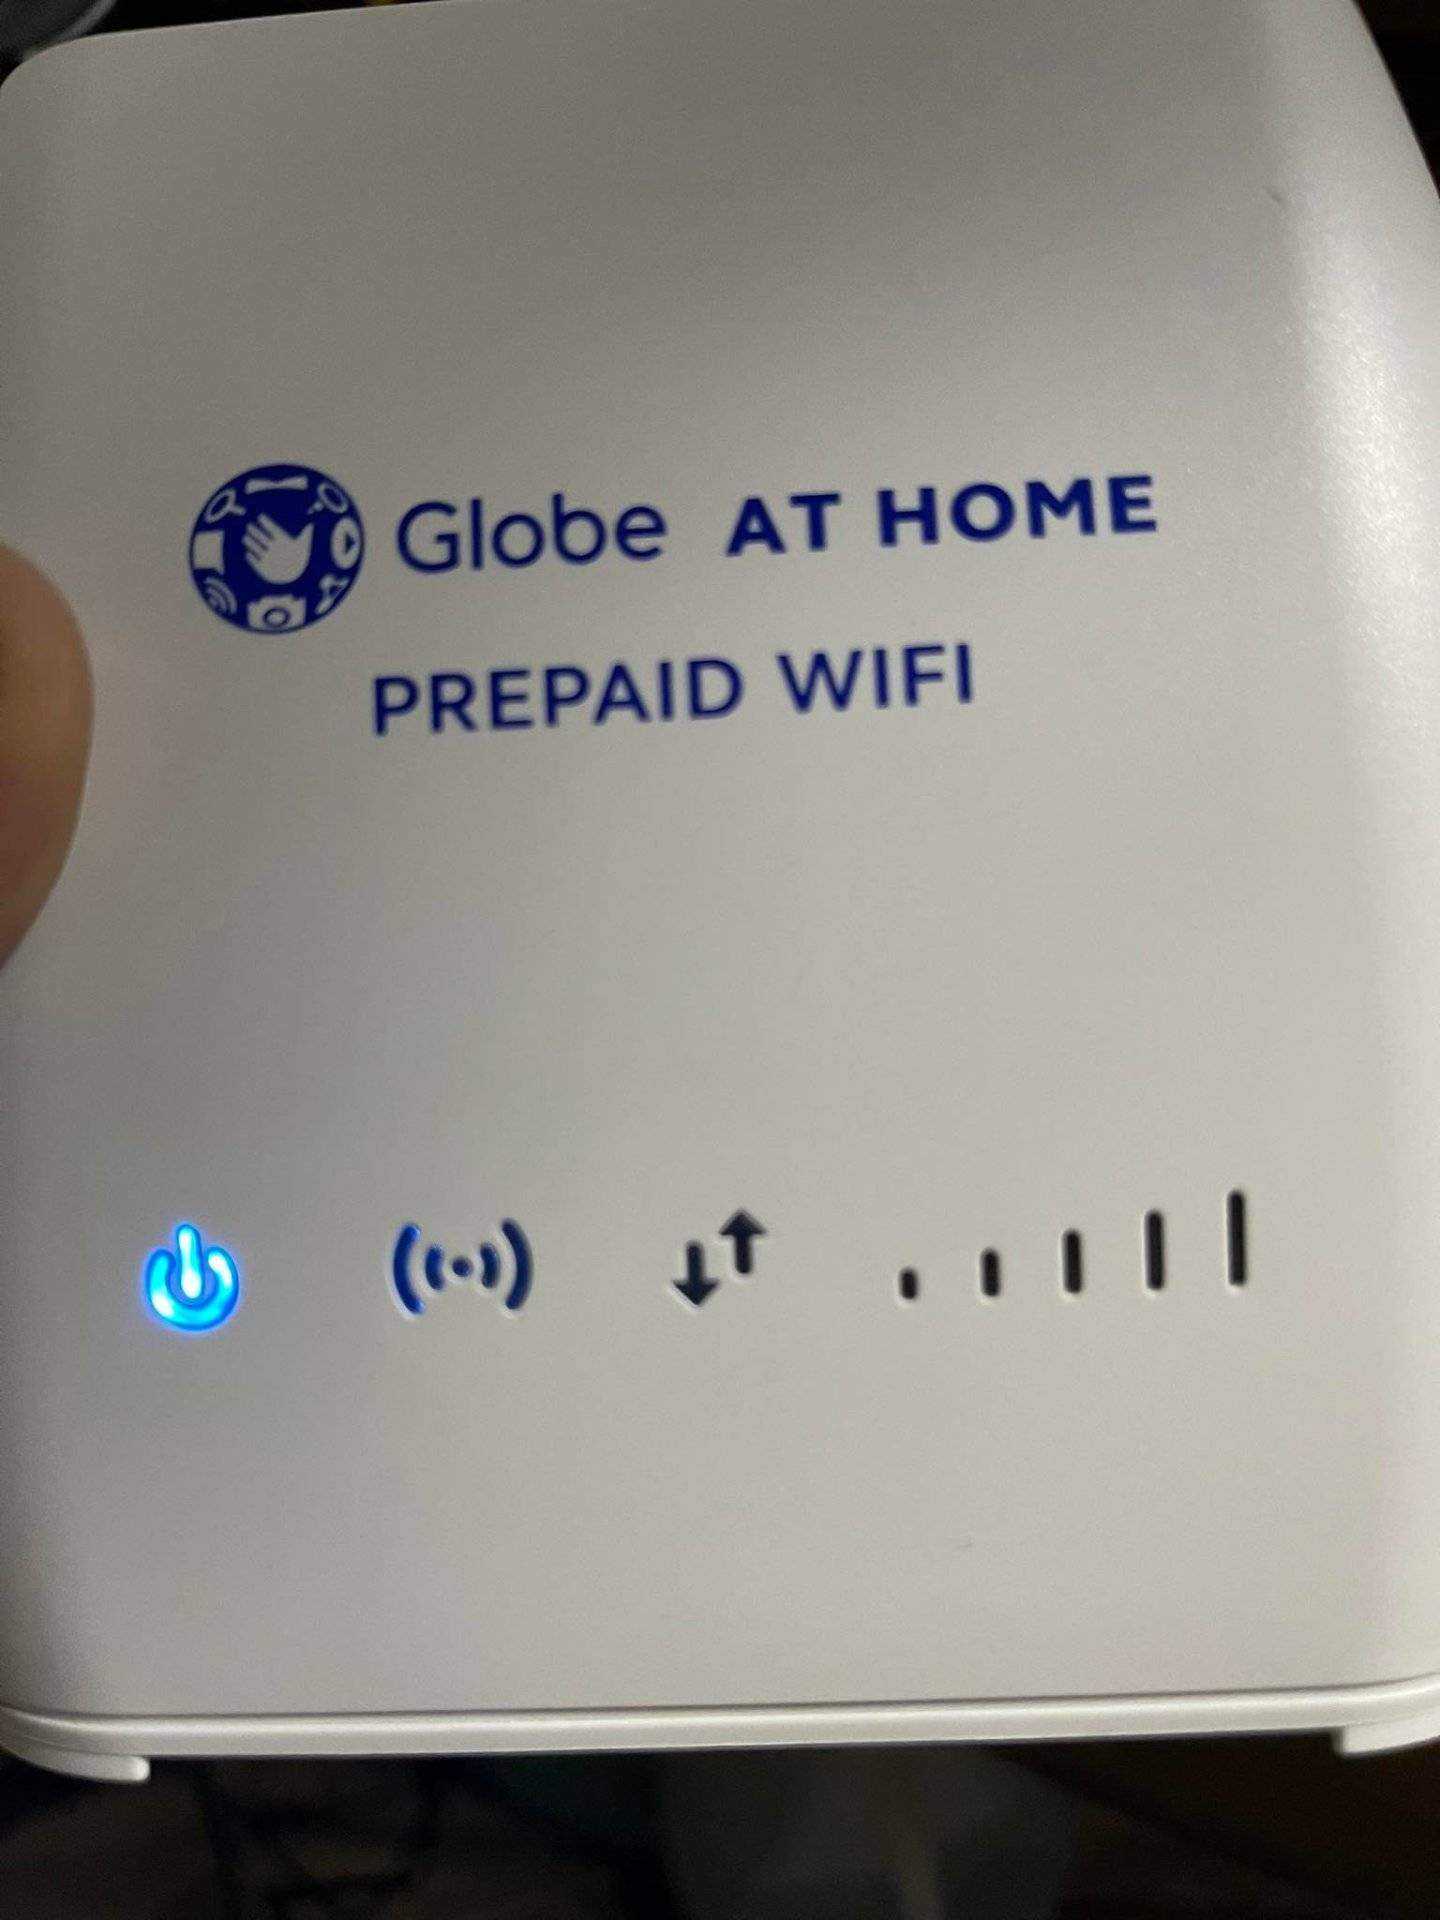 power-button-light-only-globe-at-home2.jpg